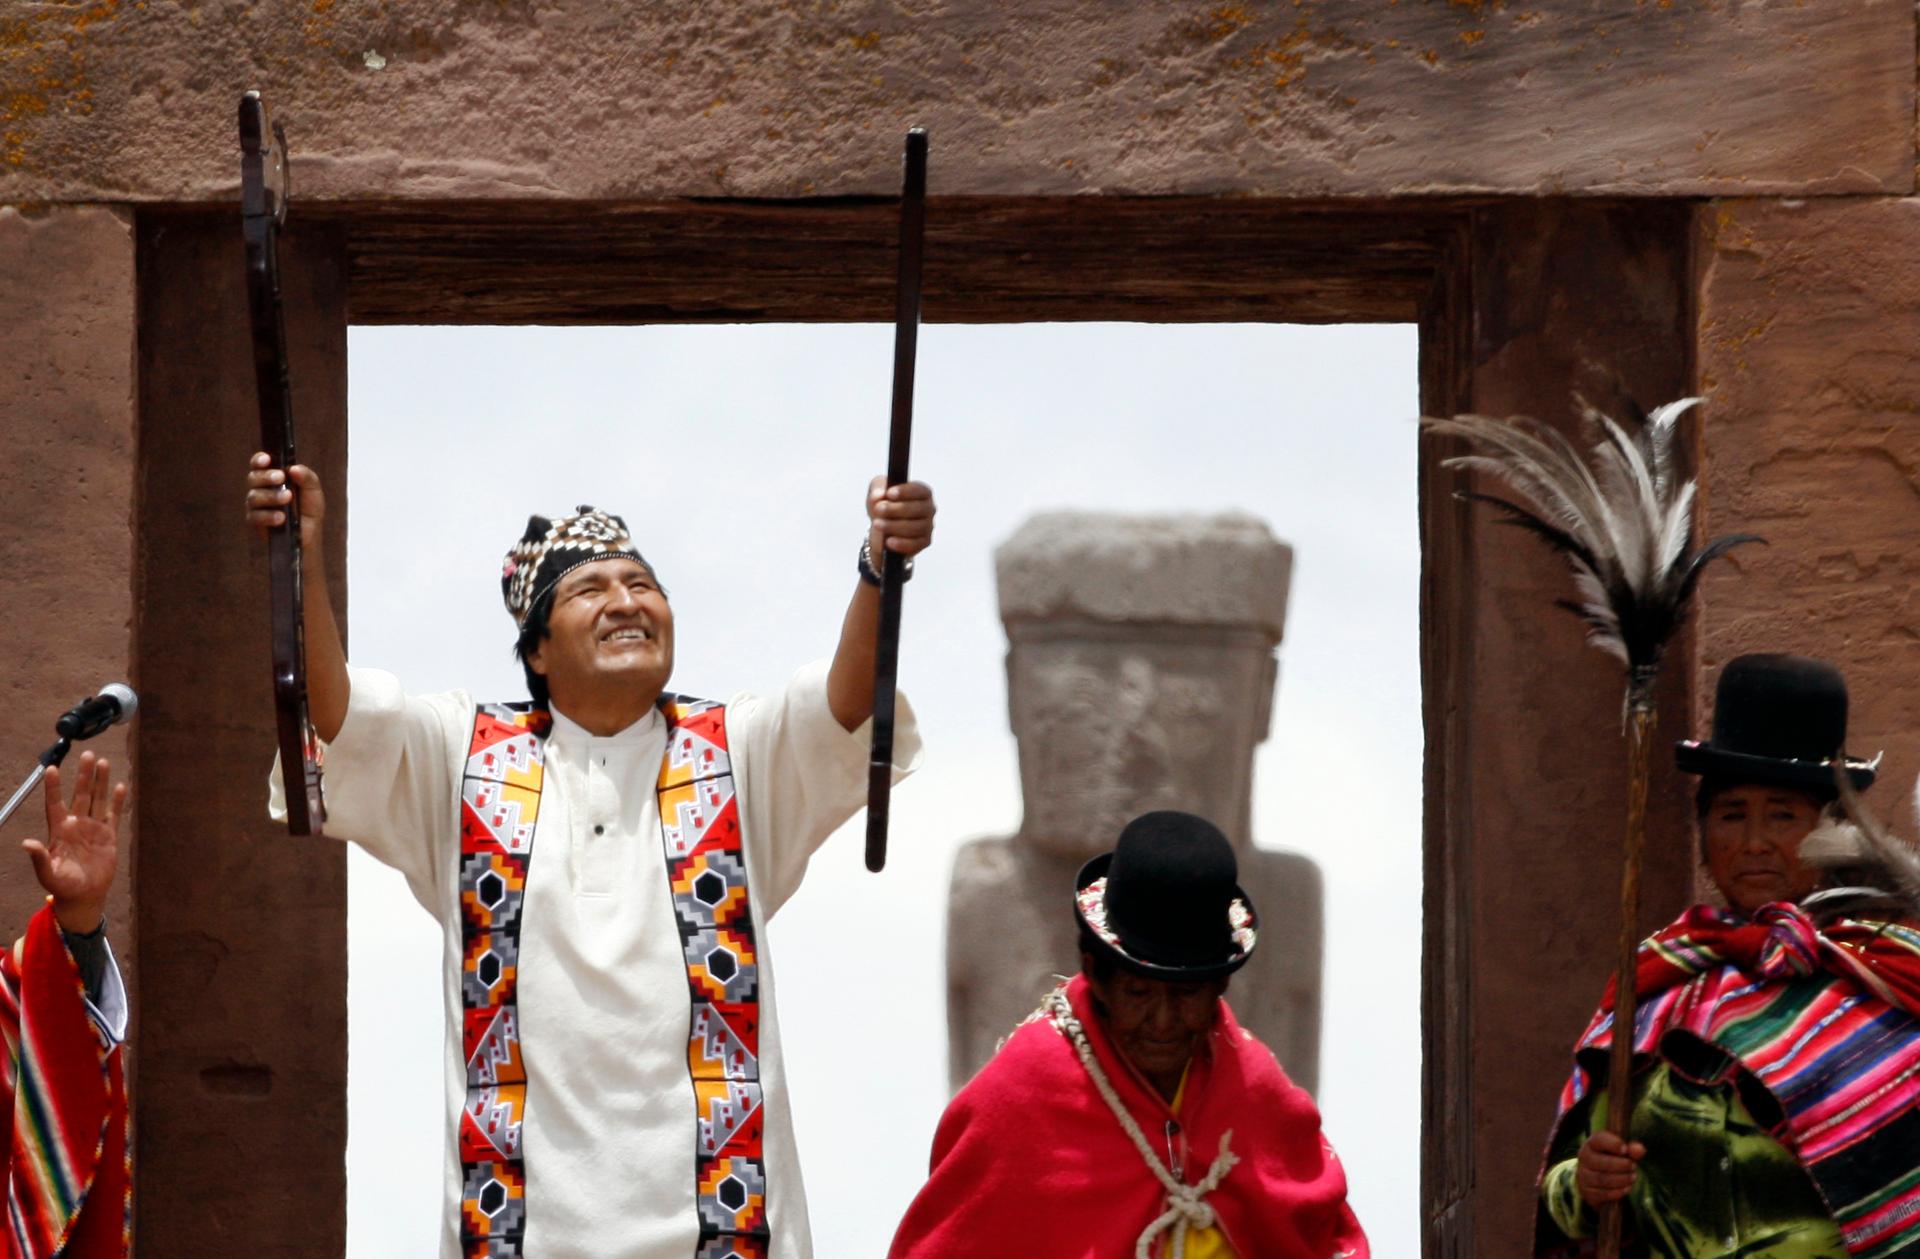 After being elected for a second term, Bolivian re-elect President Evo Morales, accompanied by indigenous leaders, holds the staff of command during an Aymara indigenous ceremony at the ancient Kalasasaya Palace at Tiwanaku, January 21, 2010. The Kalasasa